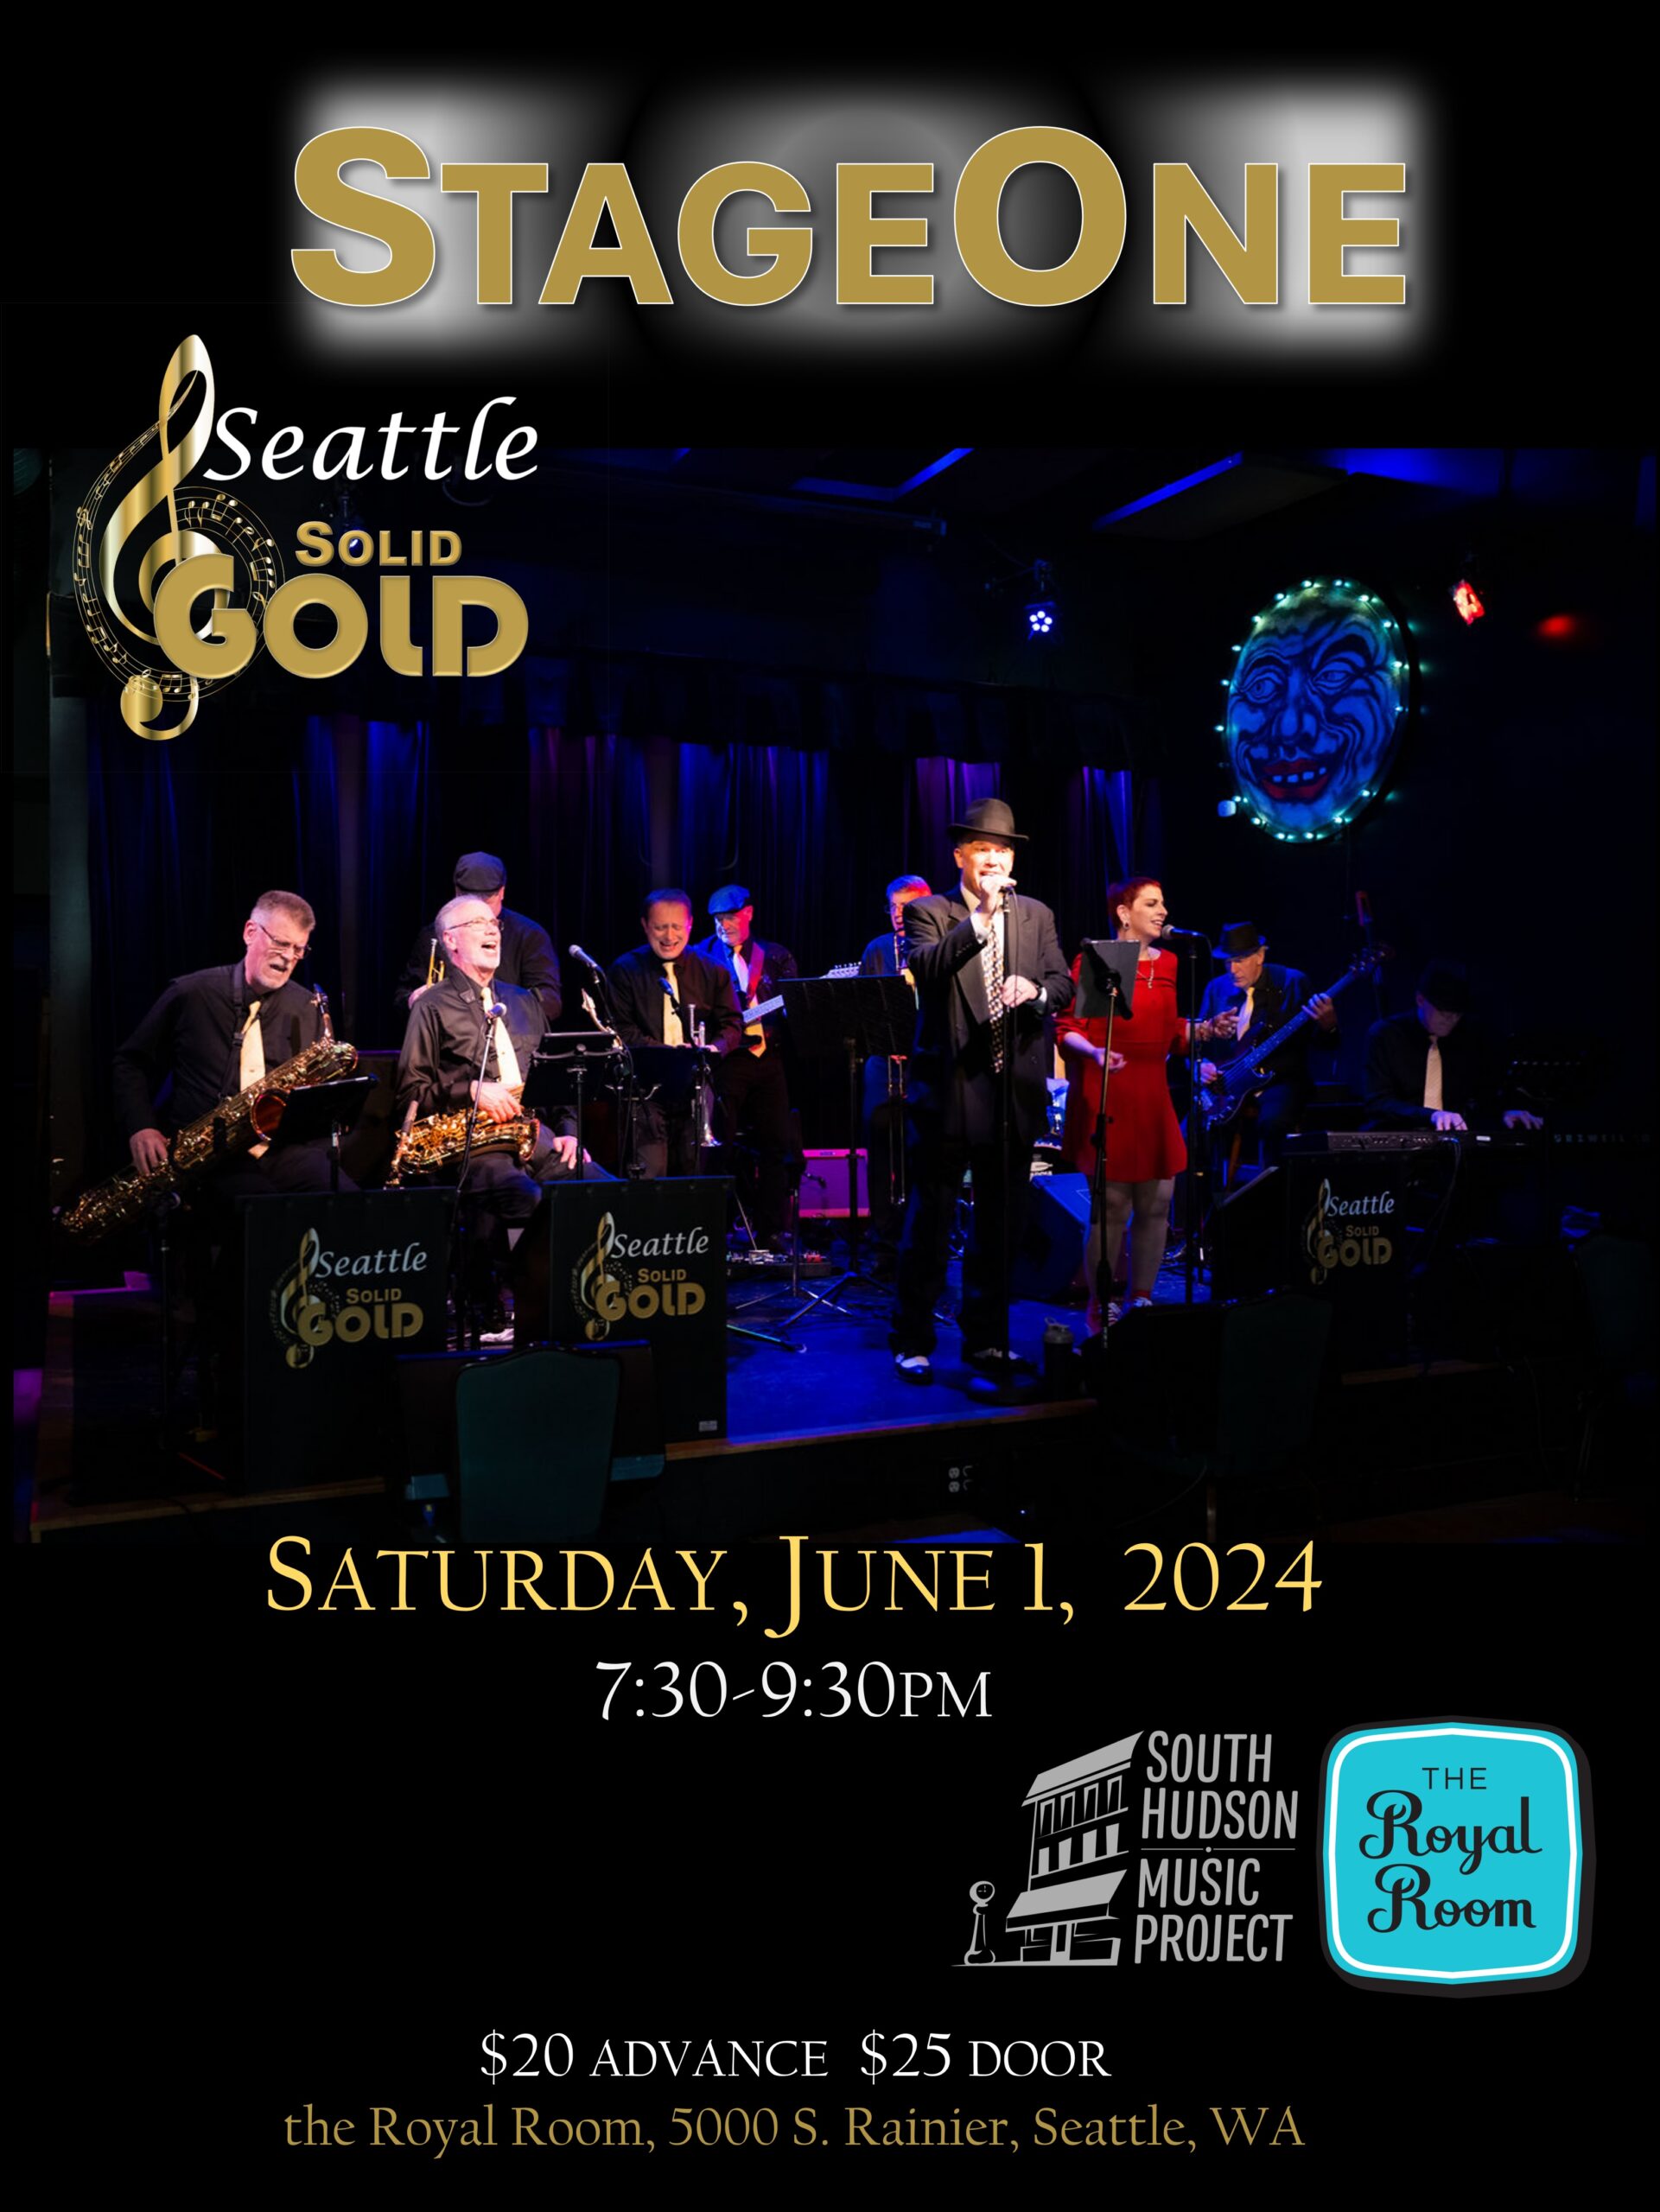 Seattle Solid Gold: StageOne!